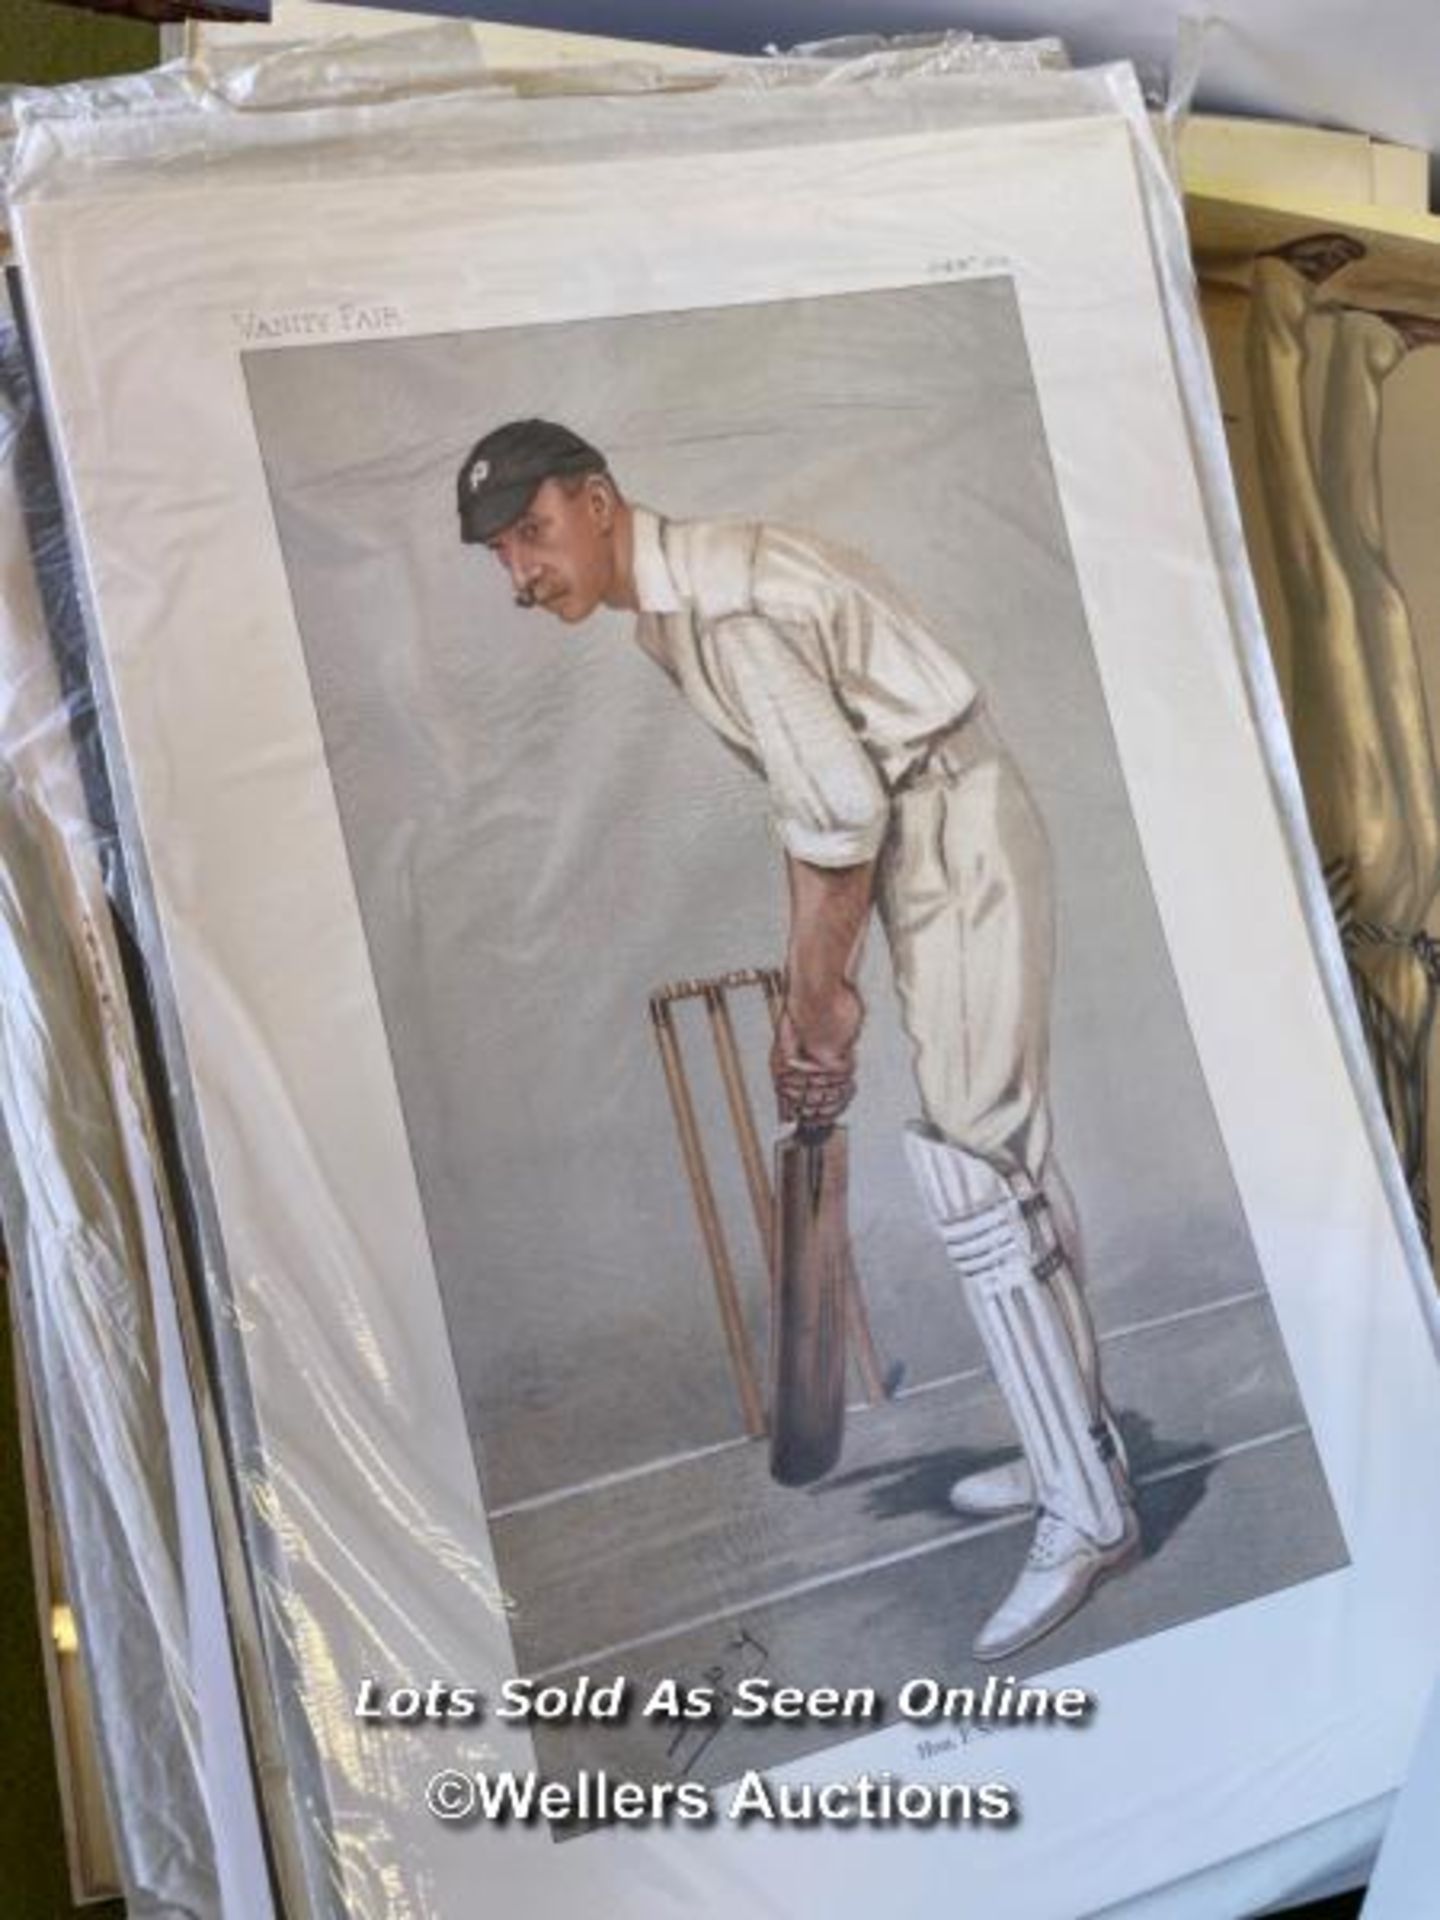 LARGE QUANTITY OF VINTAGE CALENDAR PAGES DEPICTING CRICKETERS - Image 2 of 6